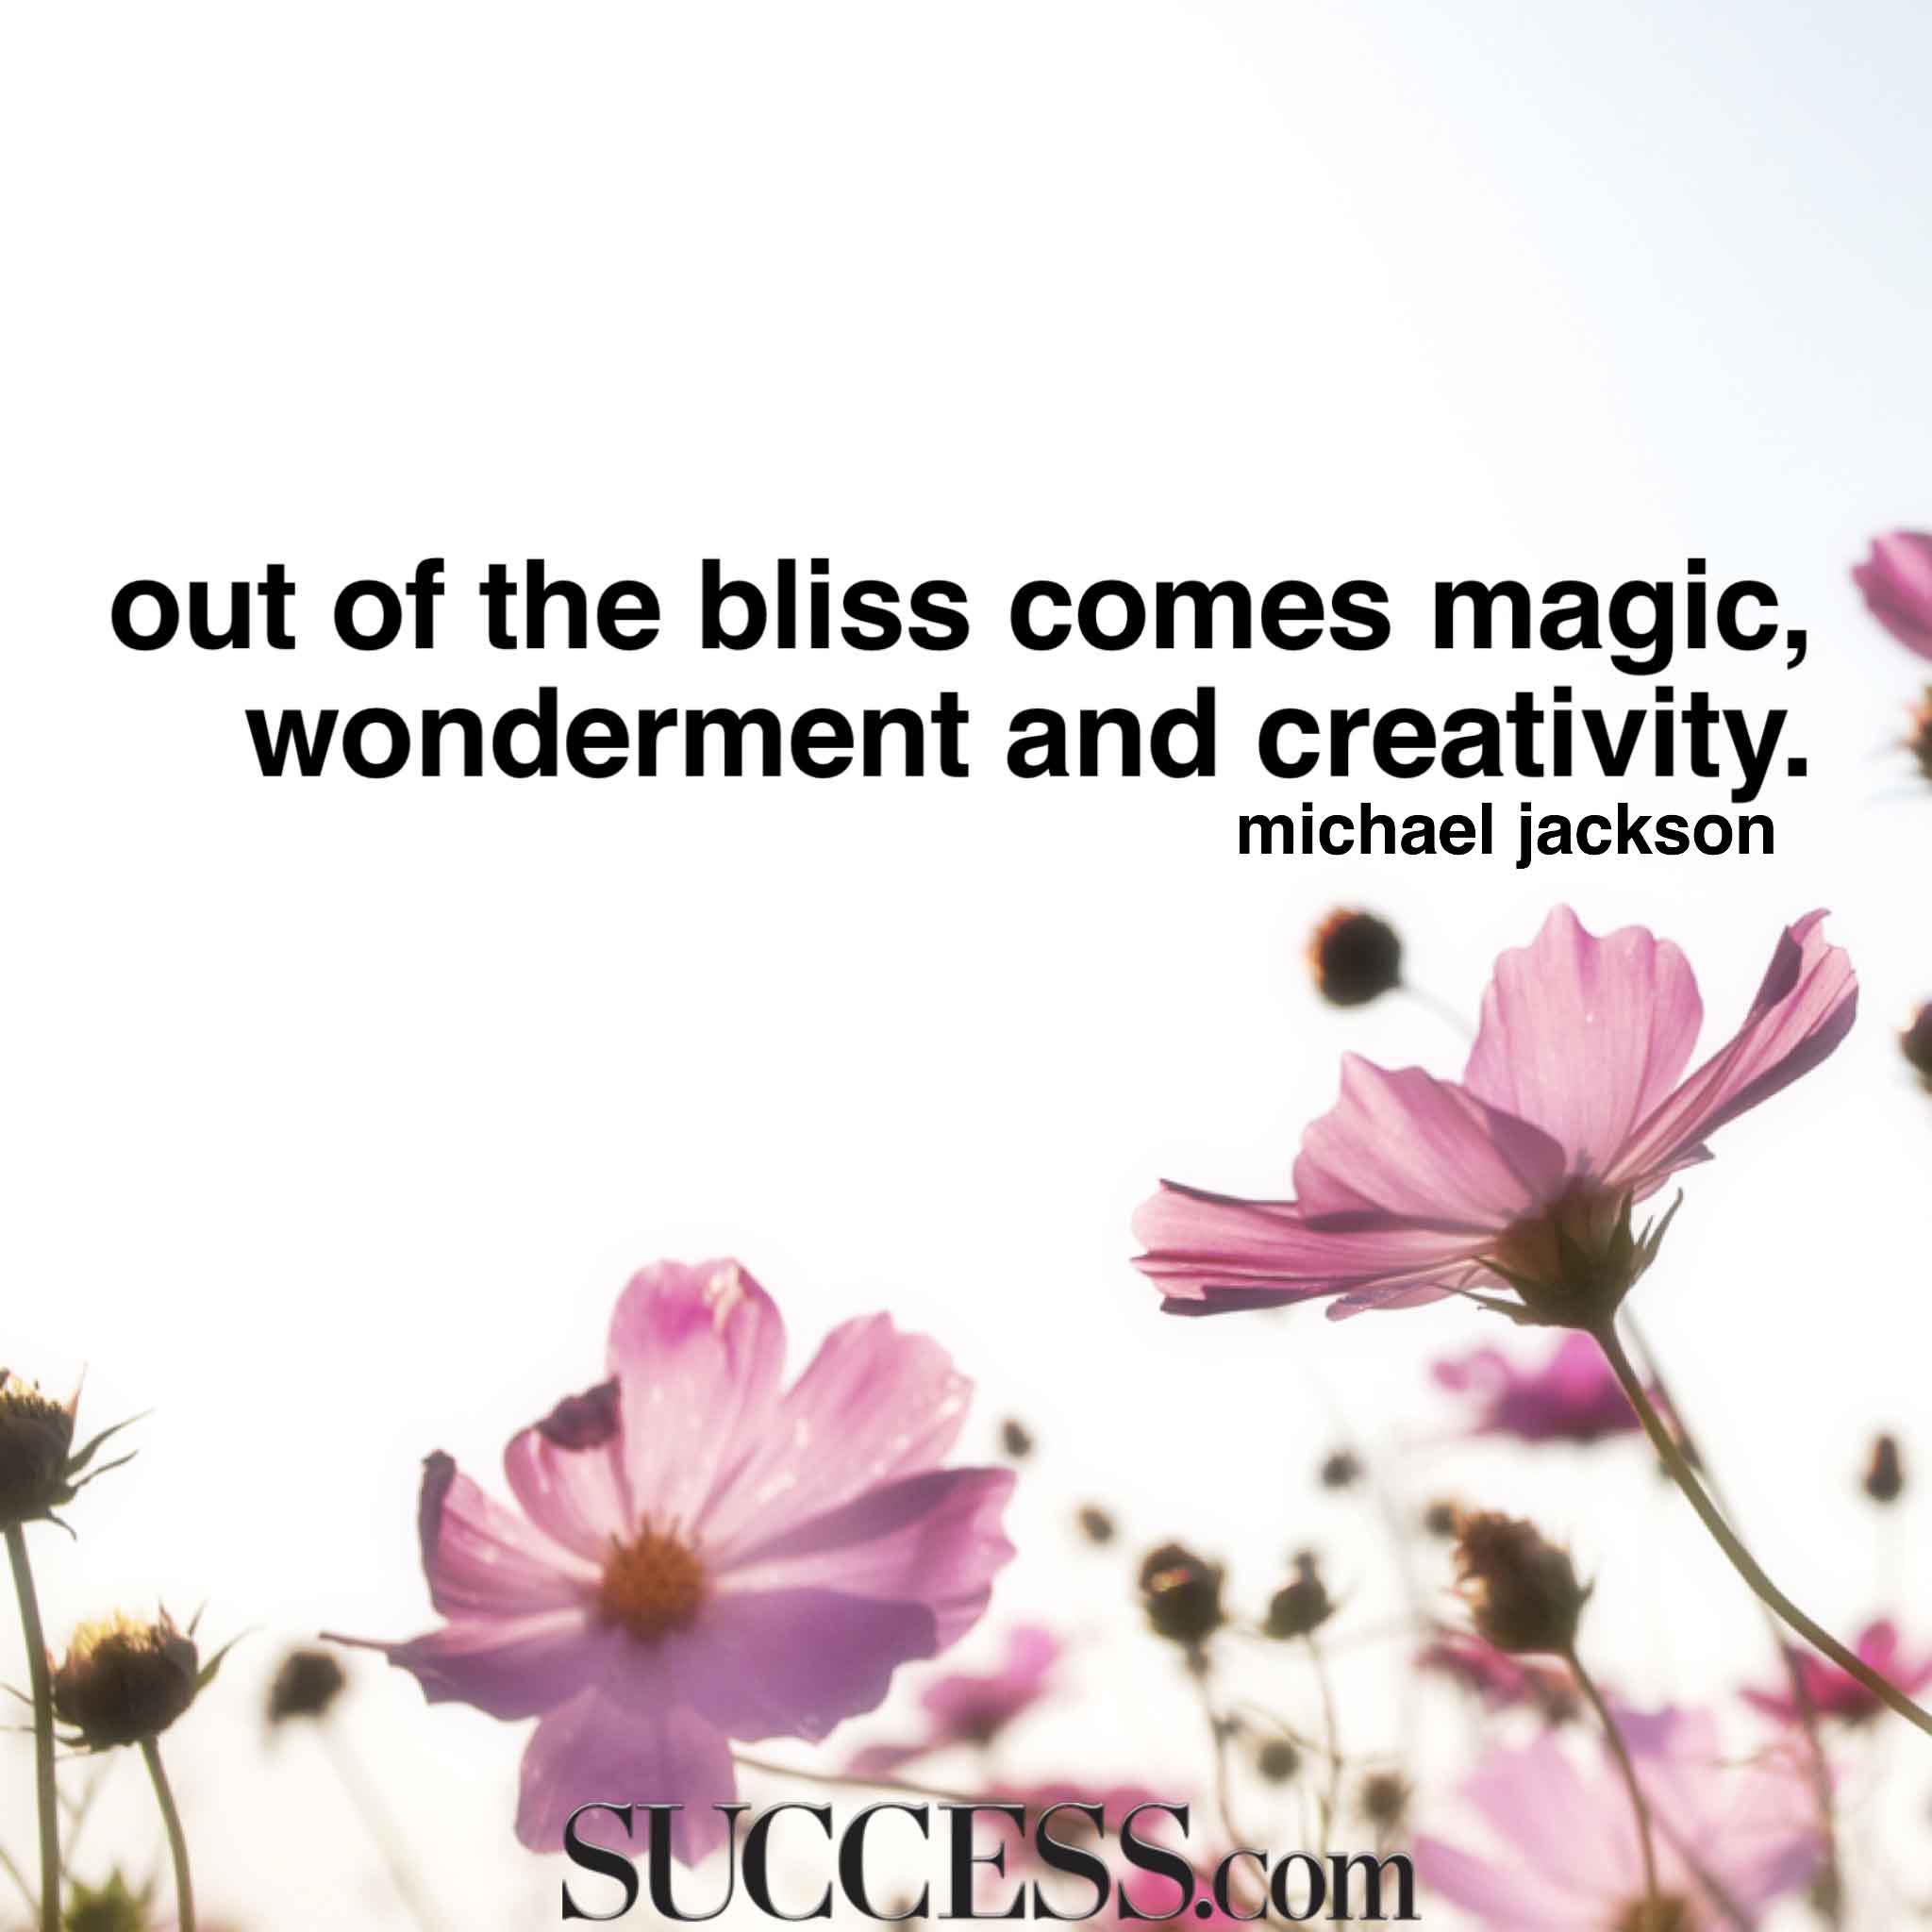 13 Quotes About Finding Your Bliss